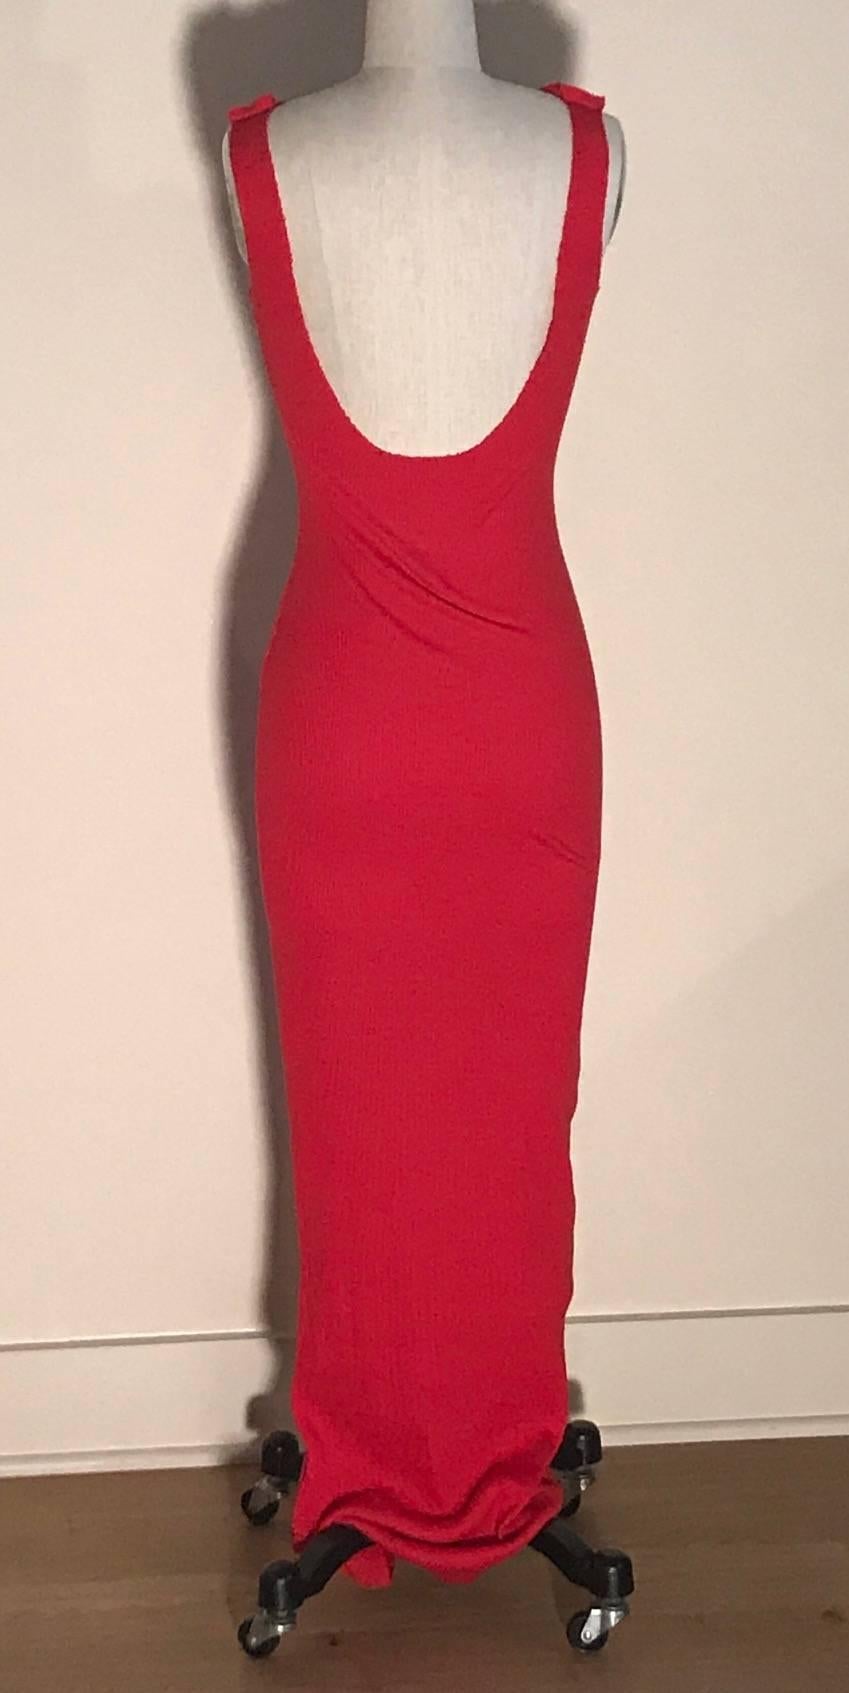 Patrick Kelly vintage 1980s long red rib knit dress with raw edge detail. Draped detail and exposed seam at shoulders, raw edge at back. 

From an auction of the Atelier of Patrick Kelly. 

No content label, probably a cotton stretch blend.

Best